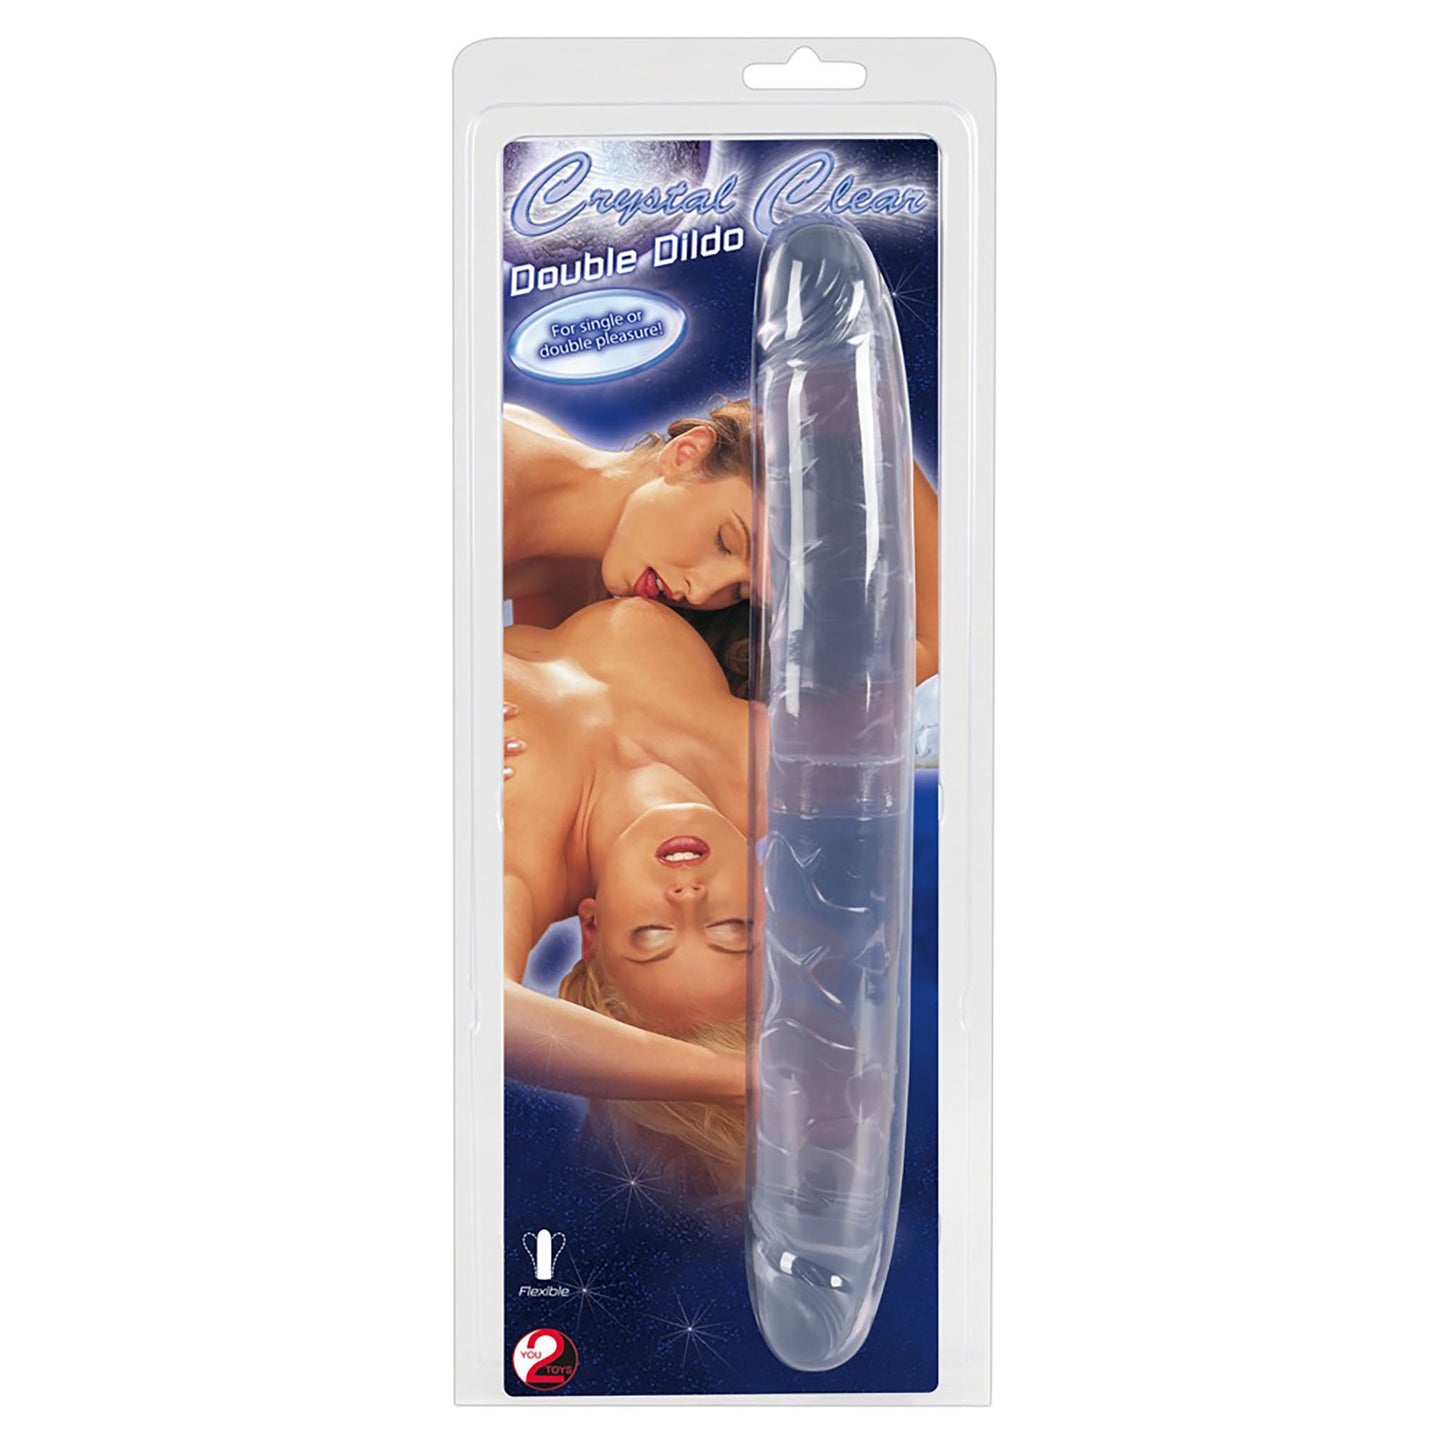 crytal duo double dildo verpackung